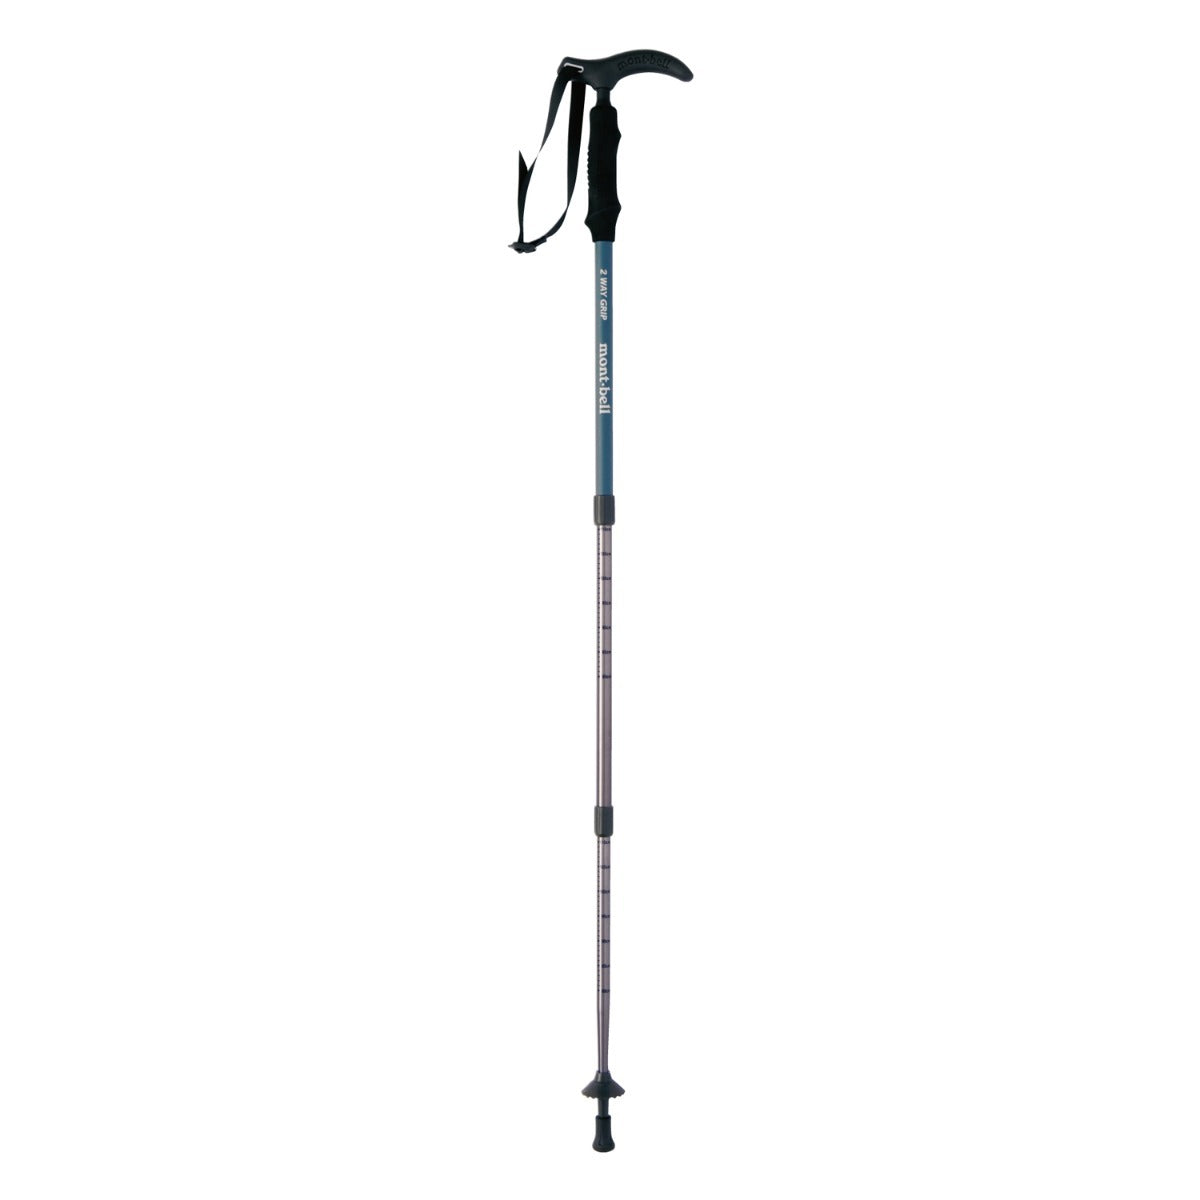 Montbell 2 Way Grip Anti Shock Pole